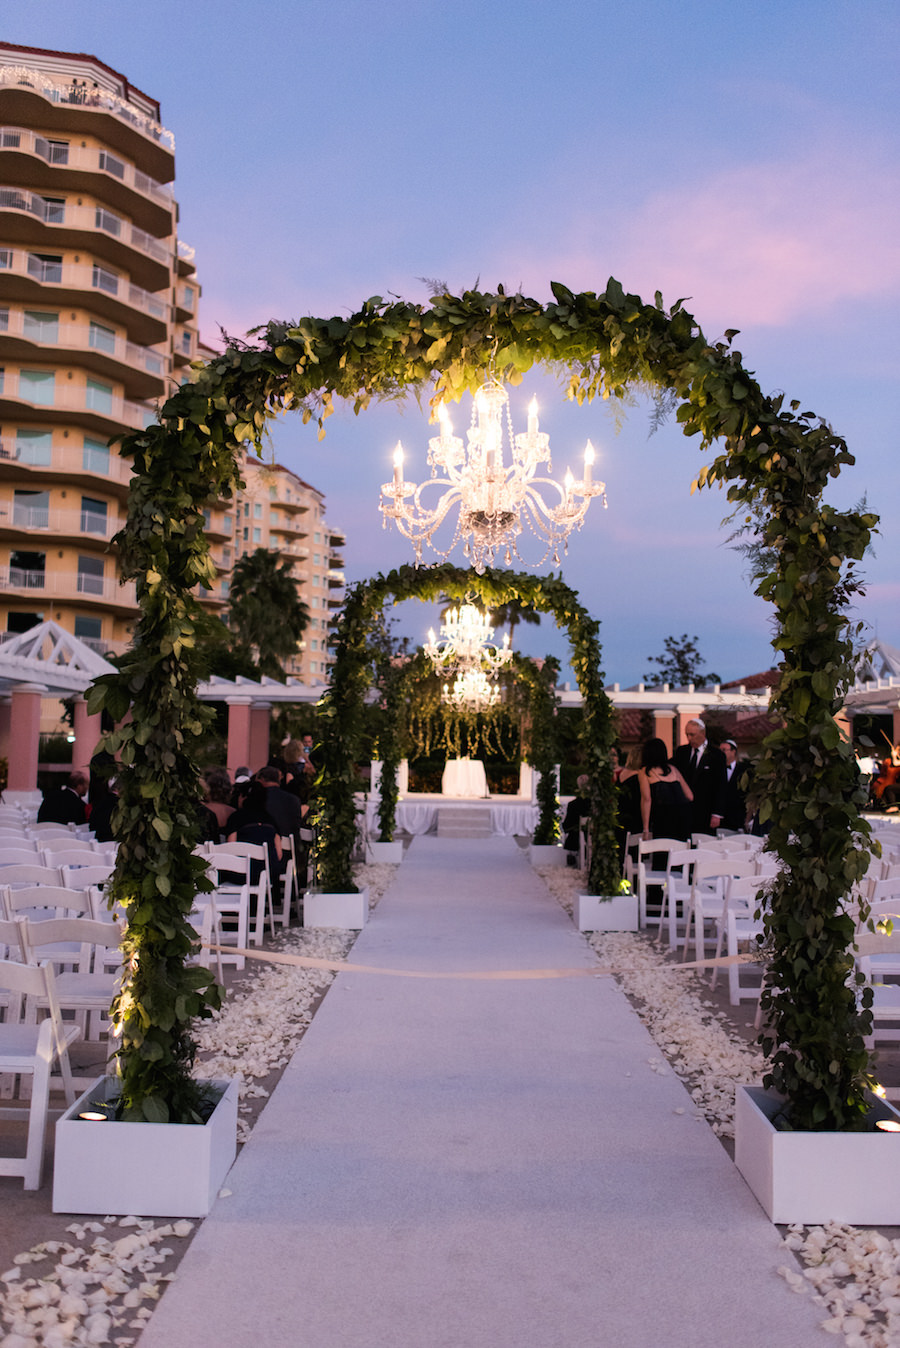 Outdoor Wedding Ceremony Decor with Green, Hanging Garland Archways and Chandeliers | St. Petersburg Wedding Venue The Renaissance Vinoy Hotel